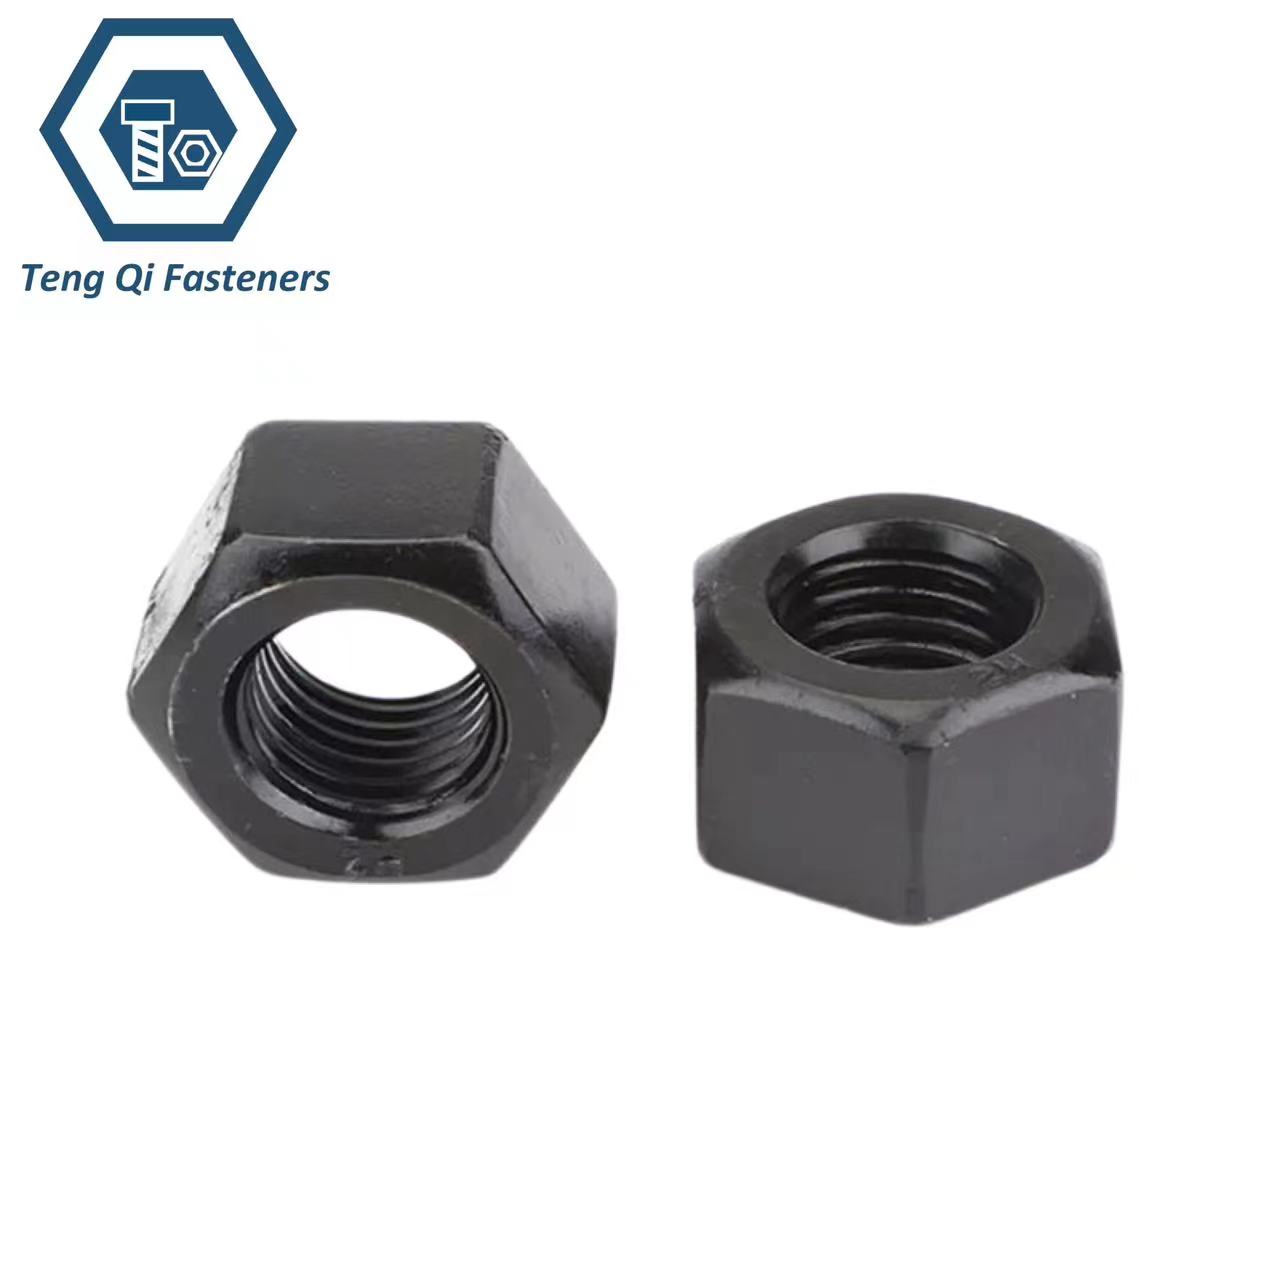 GOST 28919 Black Oxidation Russia Standard Flange Connections Thick Hex Nuts